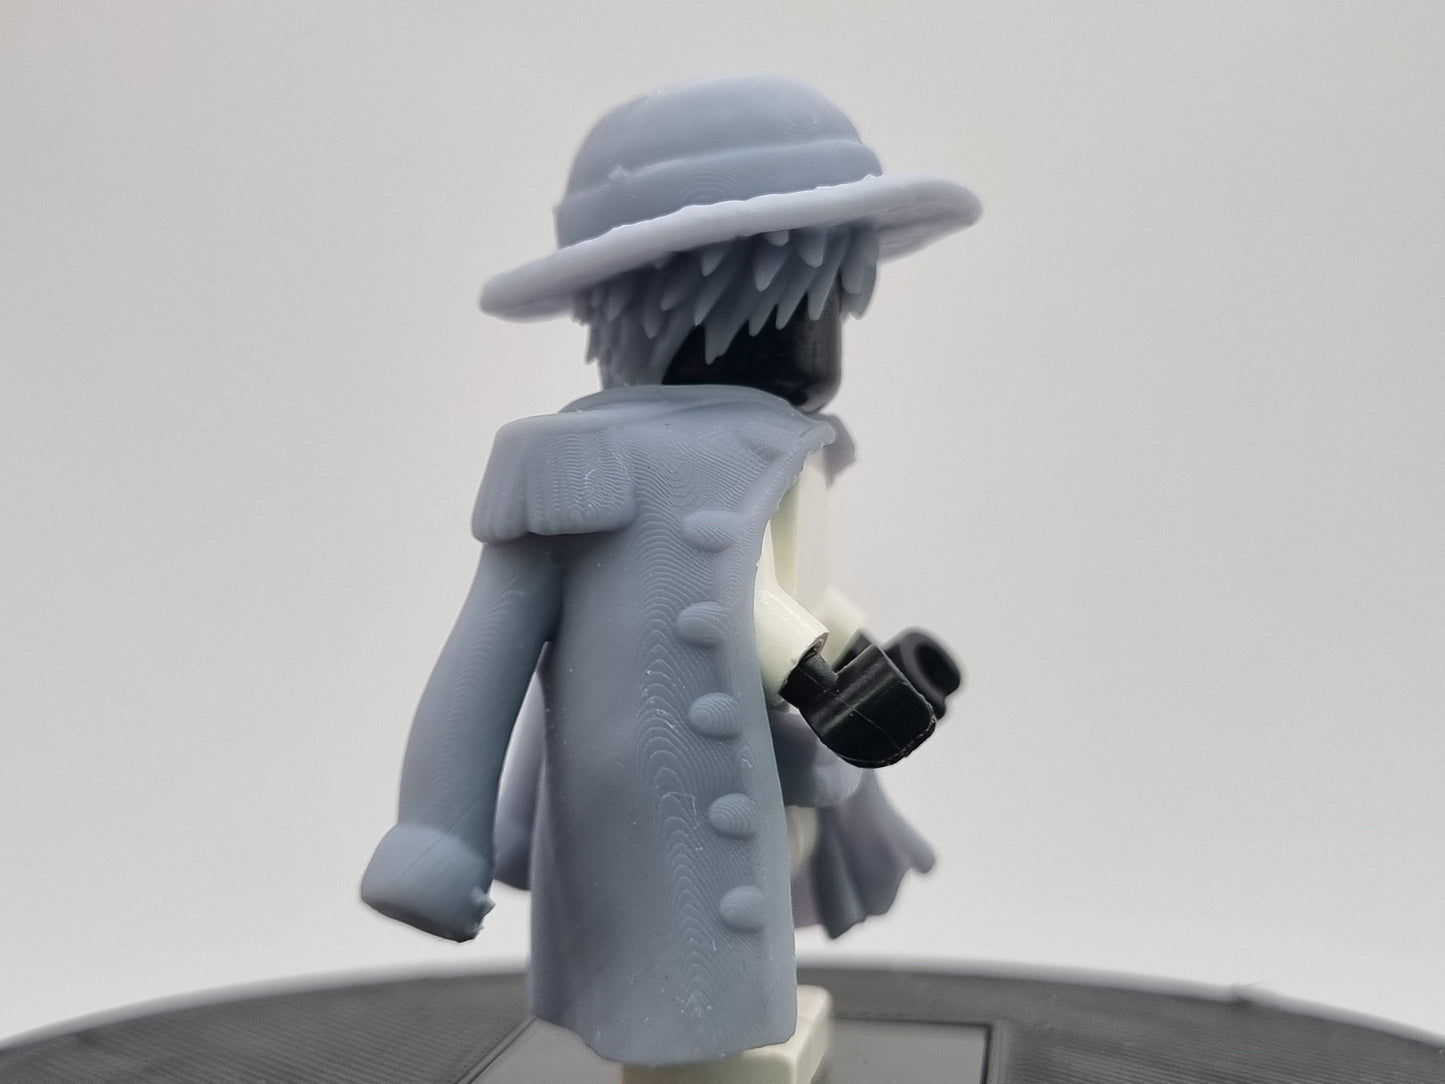 Building toy custom 3D printed rubber pirrate captain with cloak!